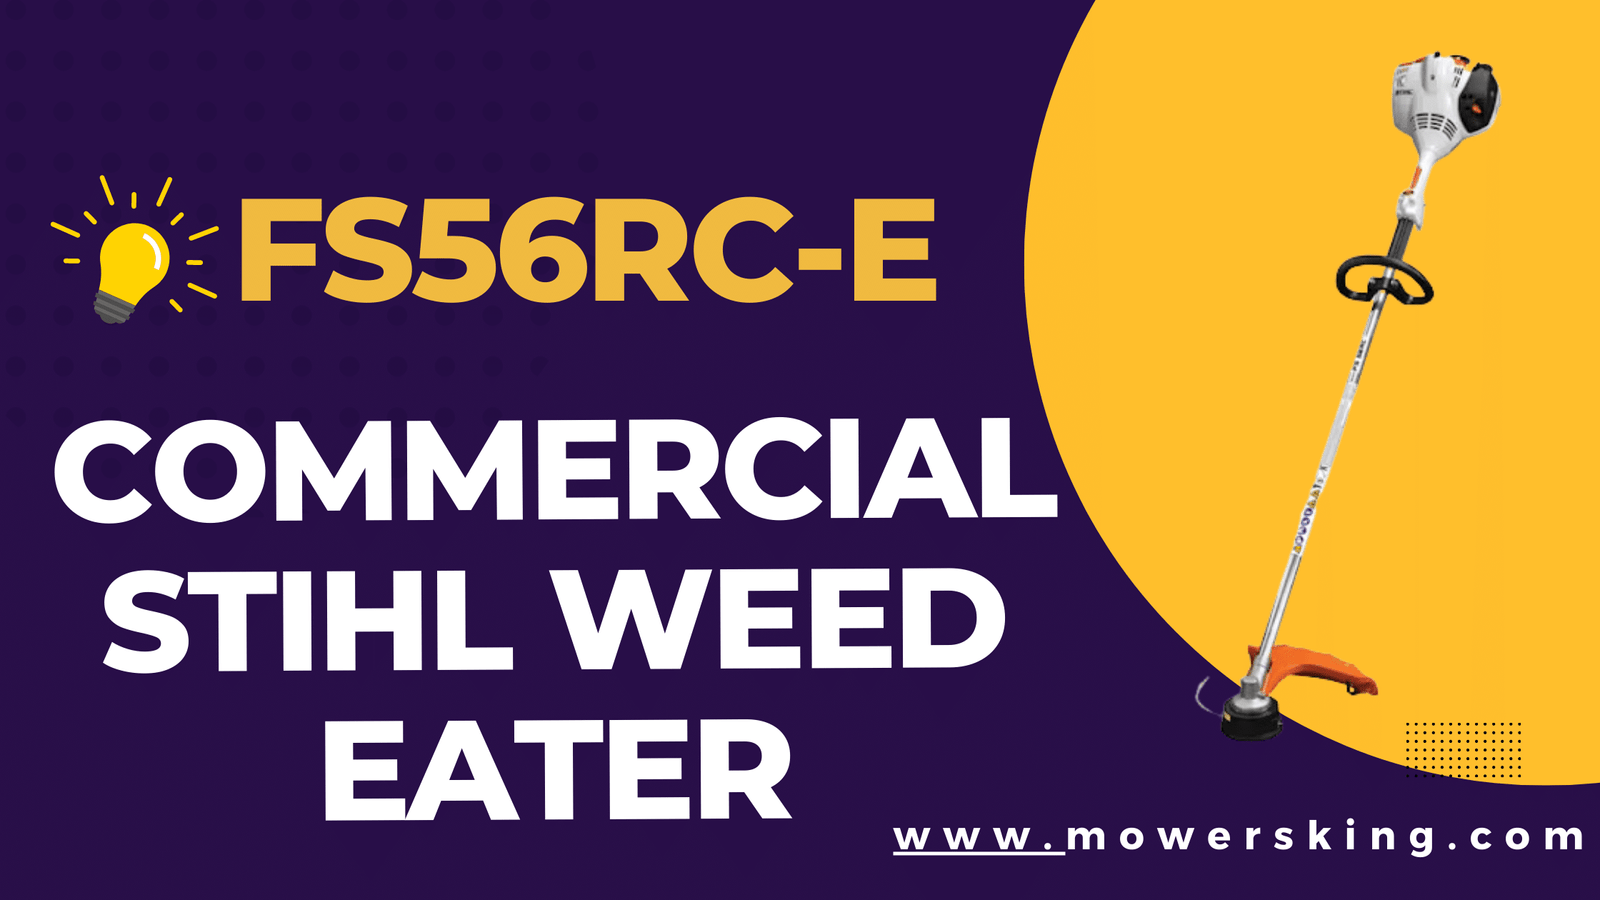 FS56RC-E - commmecial stihl weed eater